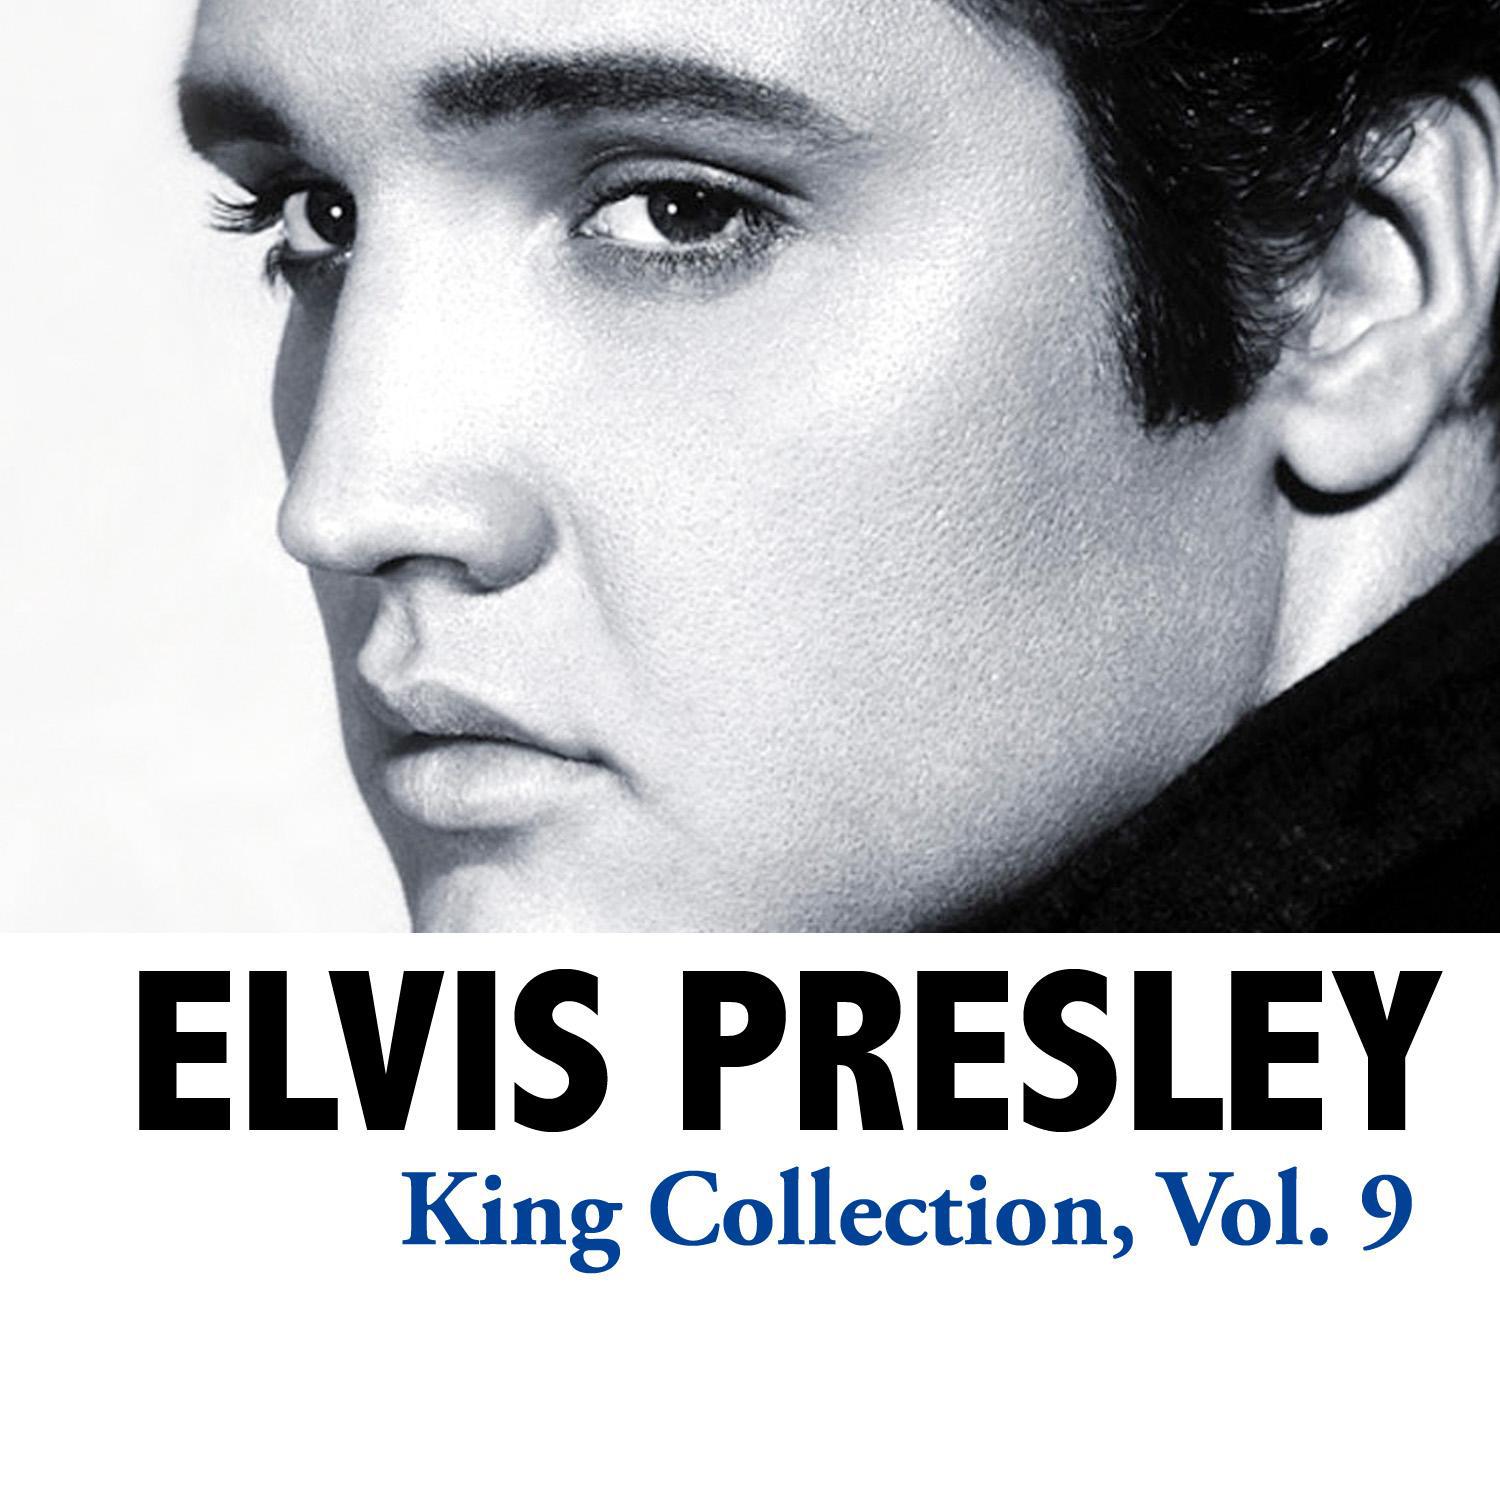 King Collection, Vol. 9